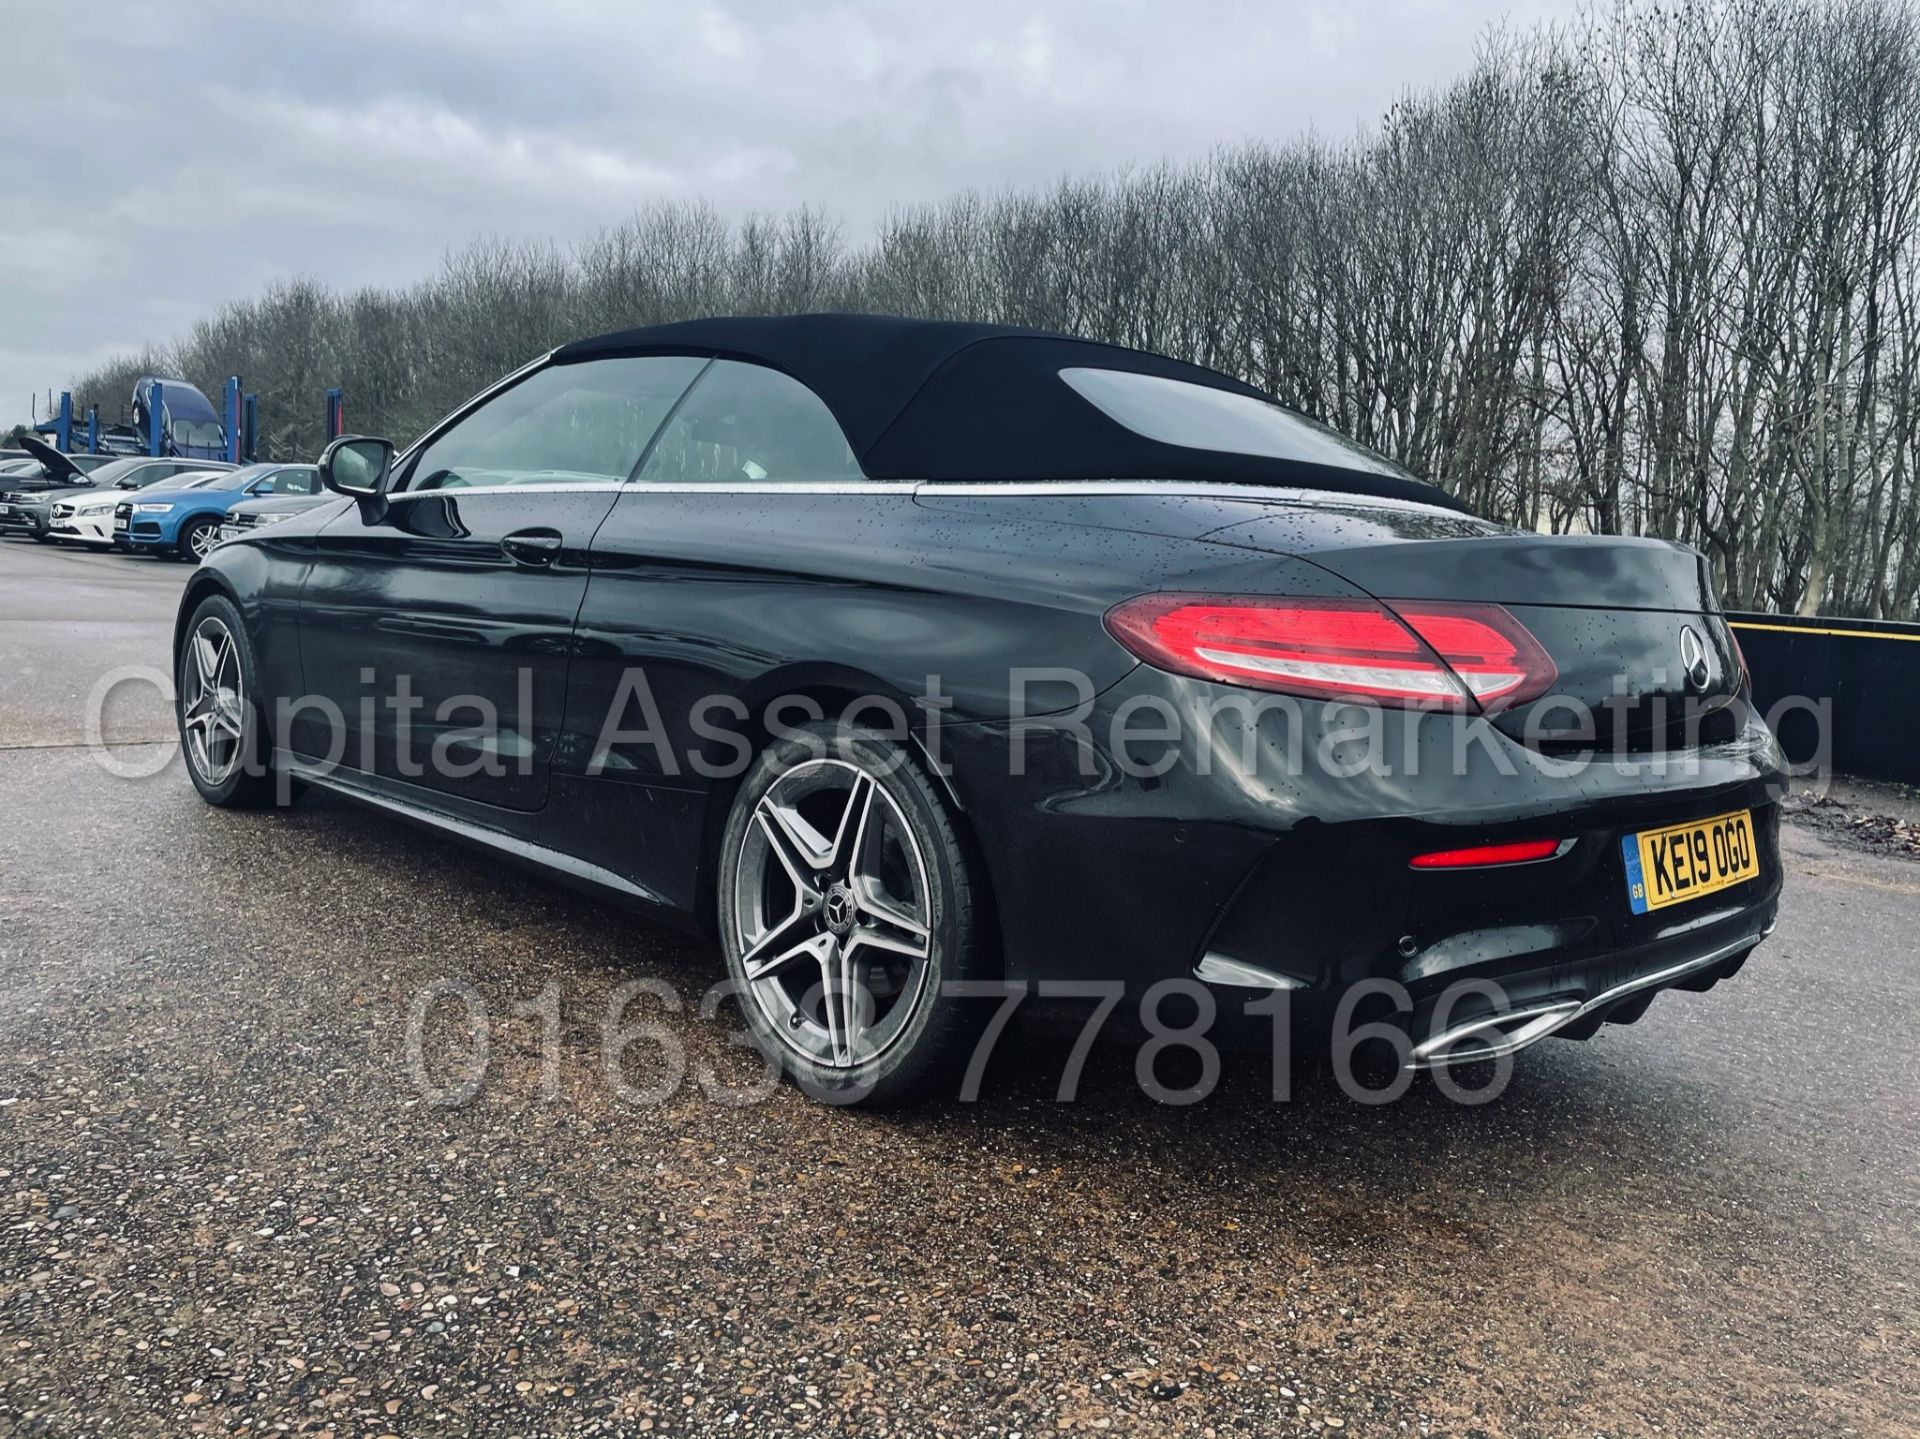 (ON SALE) MERCEDES-BENZ C220D *AMG LINE - CABRIOLET* (2019) '9G TRONIC AUTO - LEATHER - SAT NAV' - Image 10 of 56